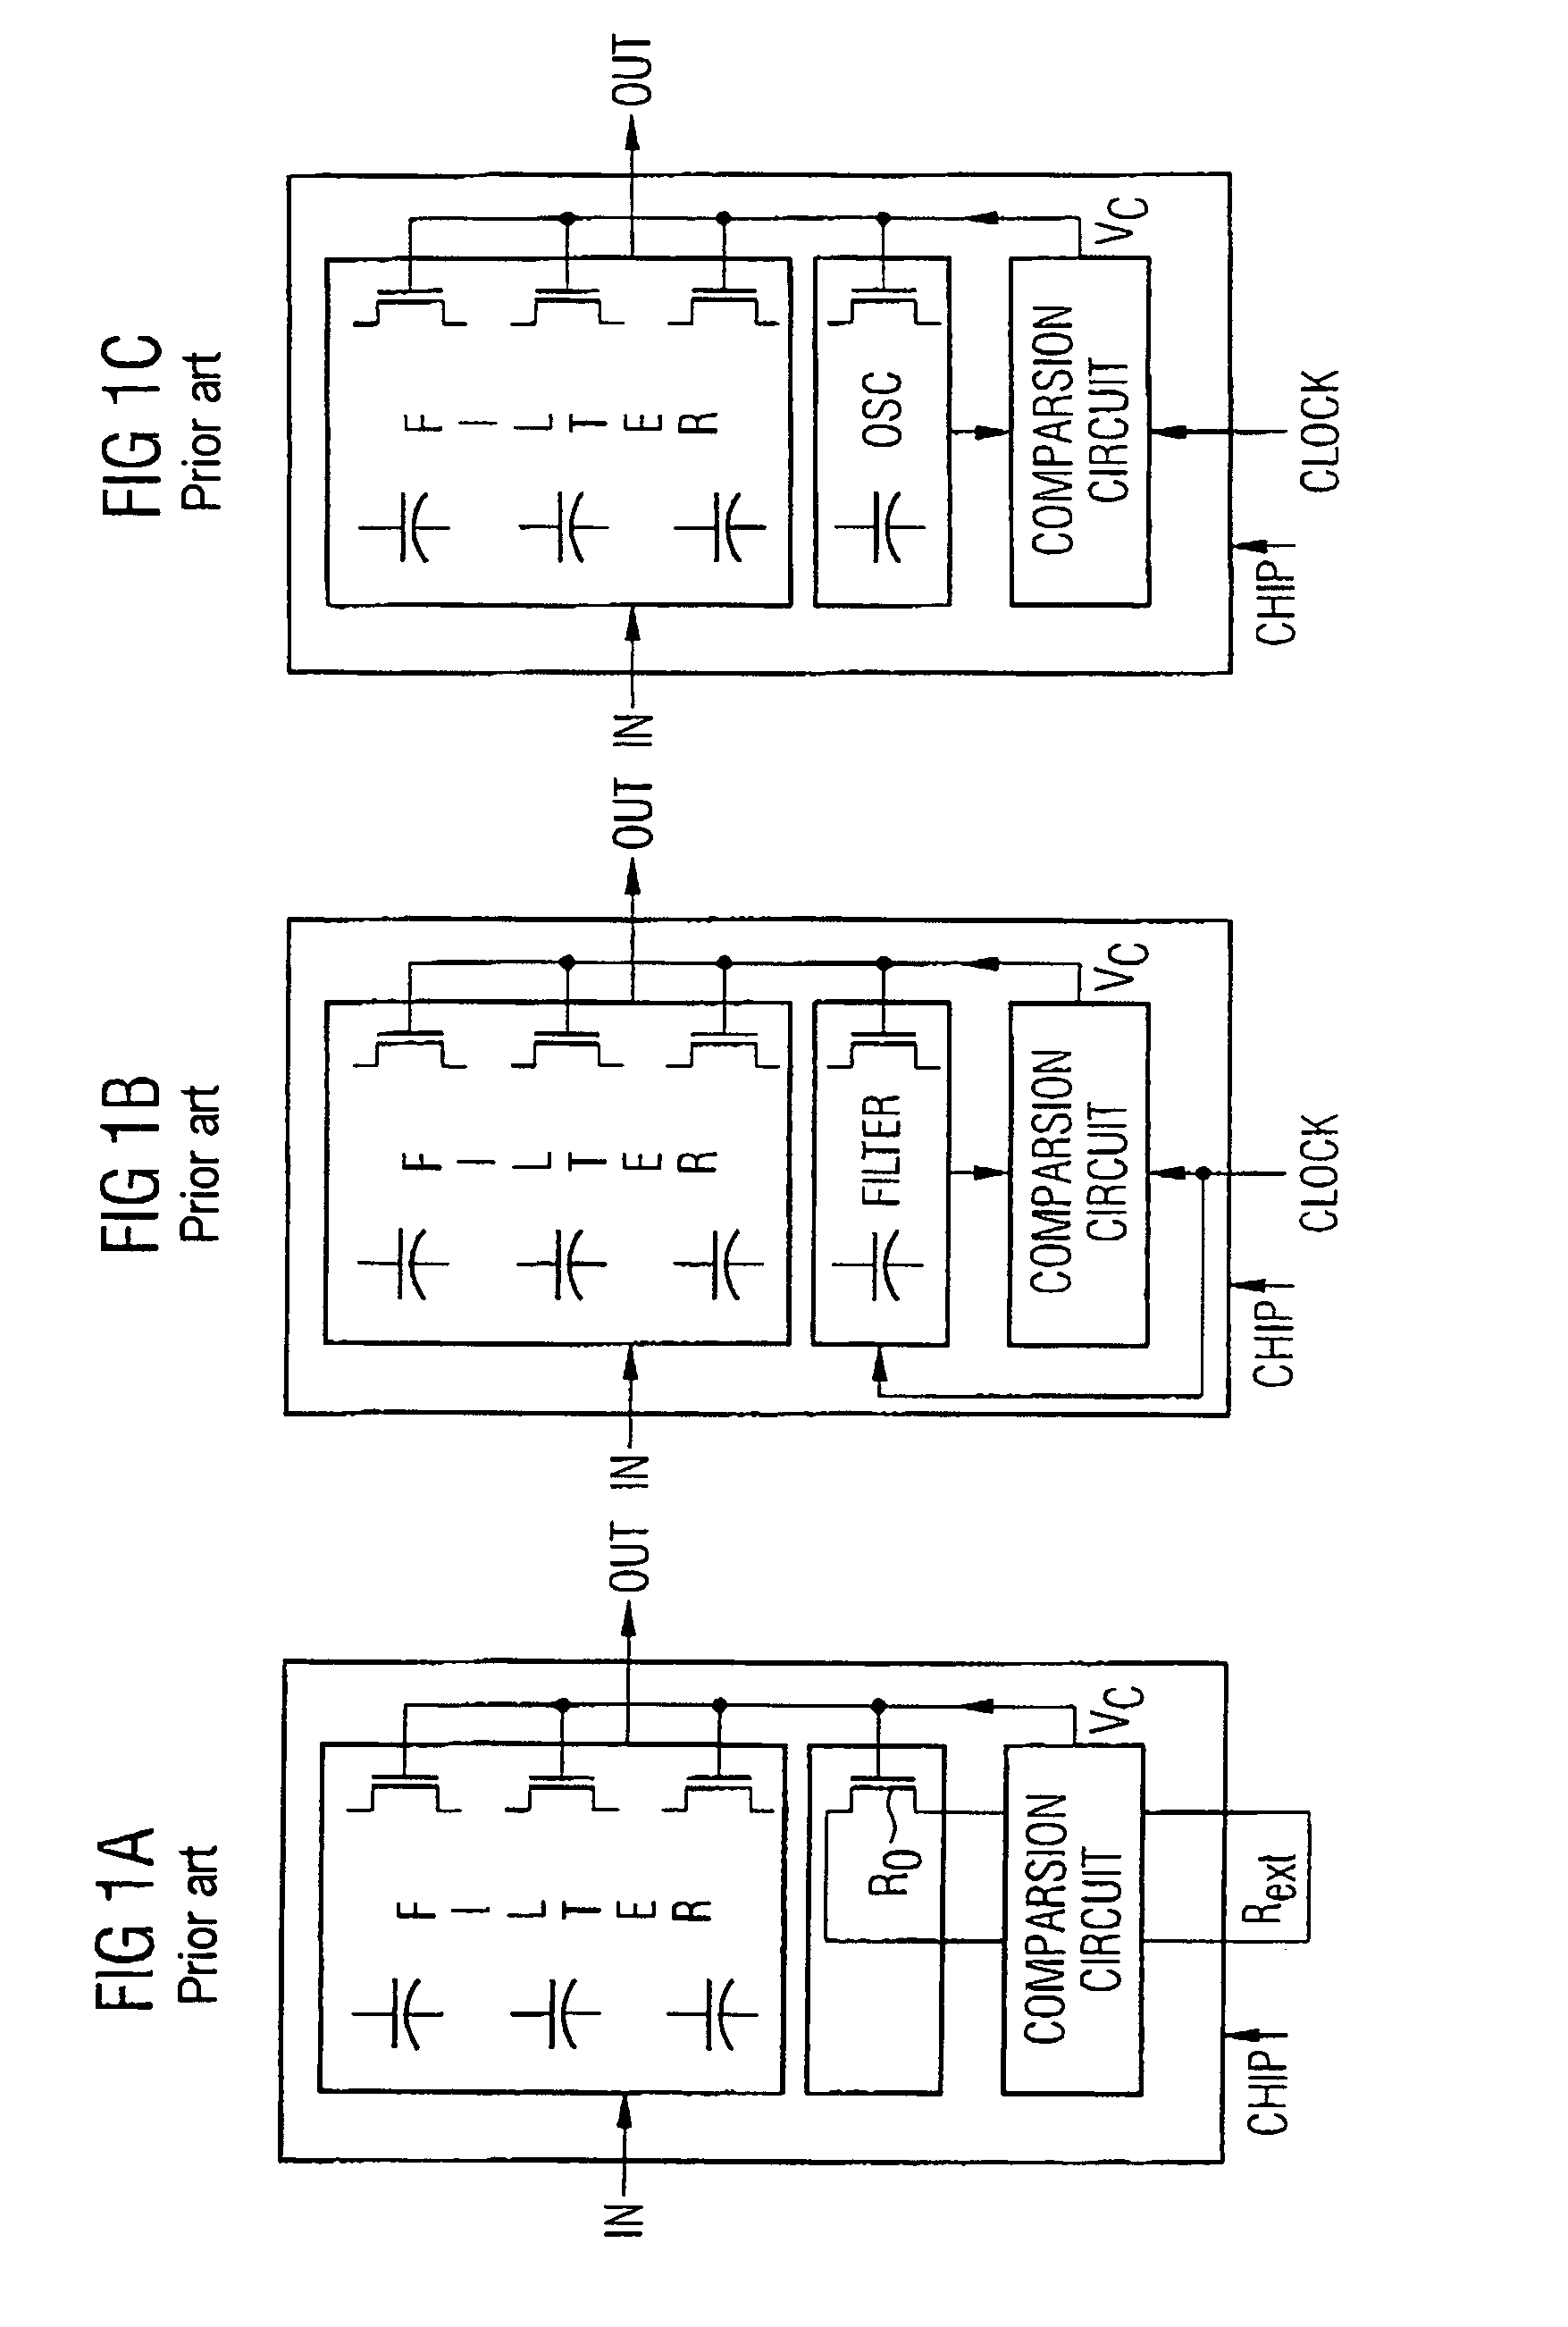 Tuning circuit for a filter